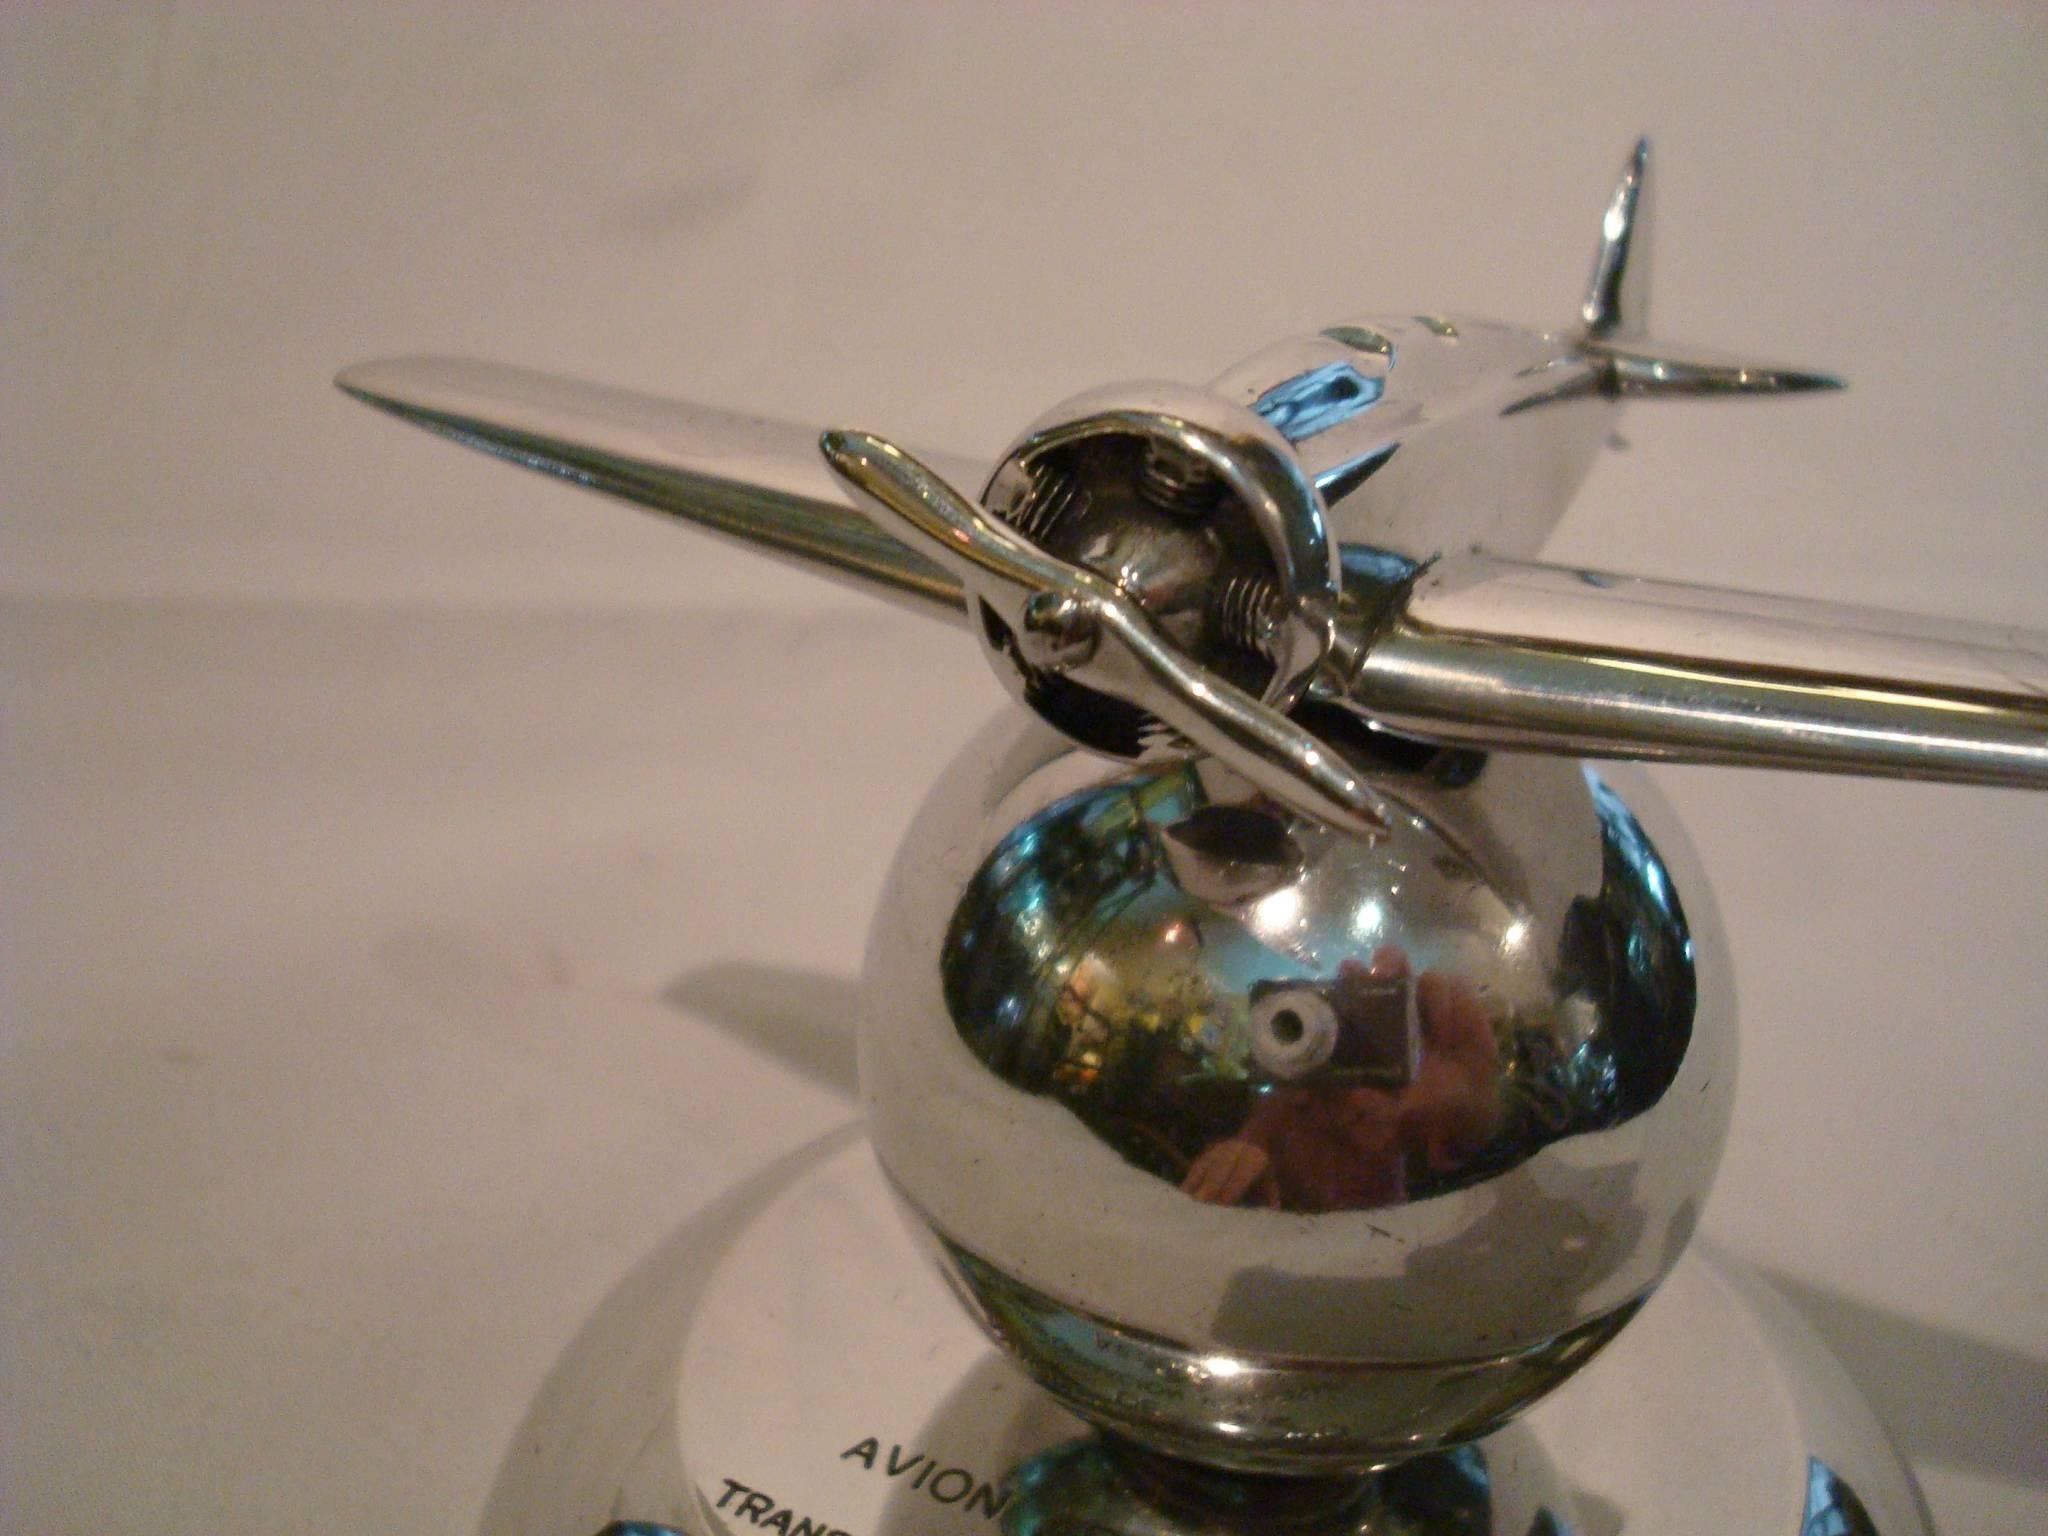 20th Century Art Deco Airplane Fighter over the World Paperweight, 1930s